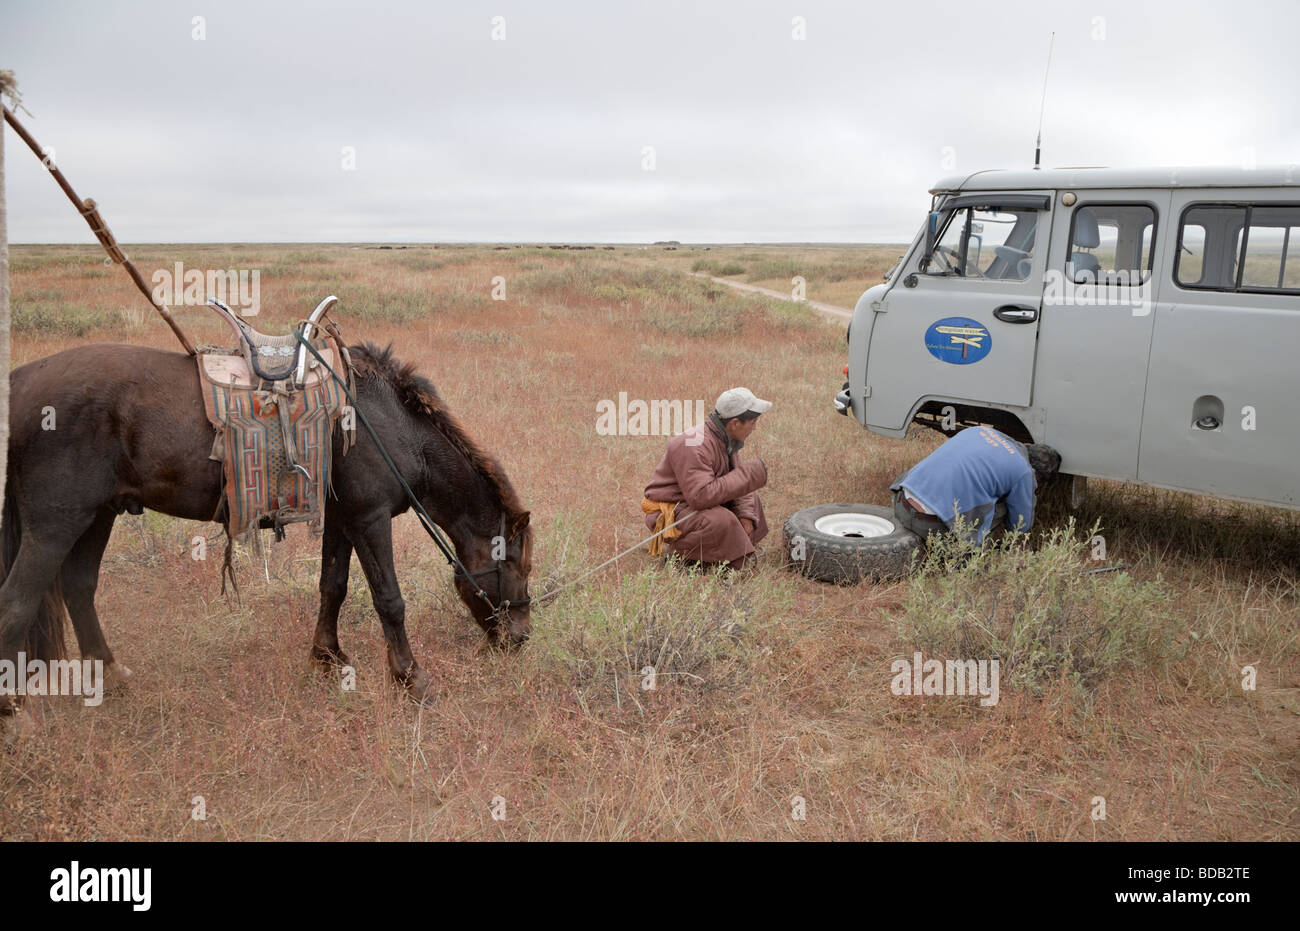 Contrasting means of transport: a Mongolian horseman supervises vehicle repairs, north central Mongolia. Which is more reliable? Stock Photo